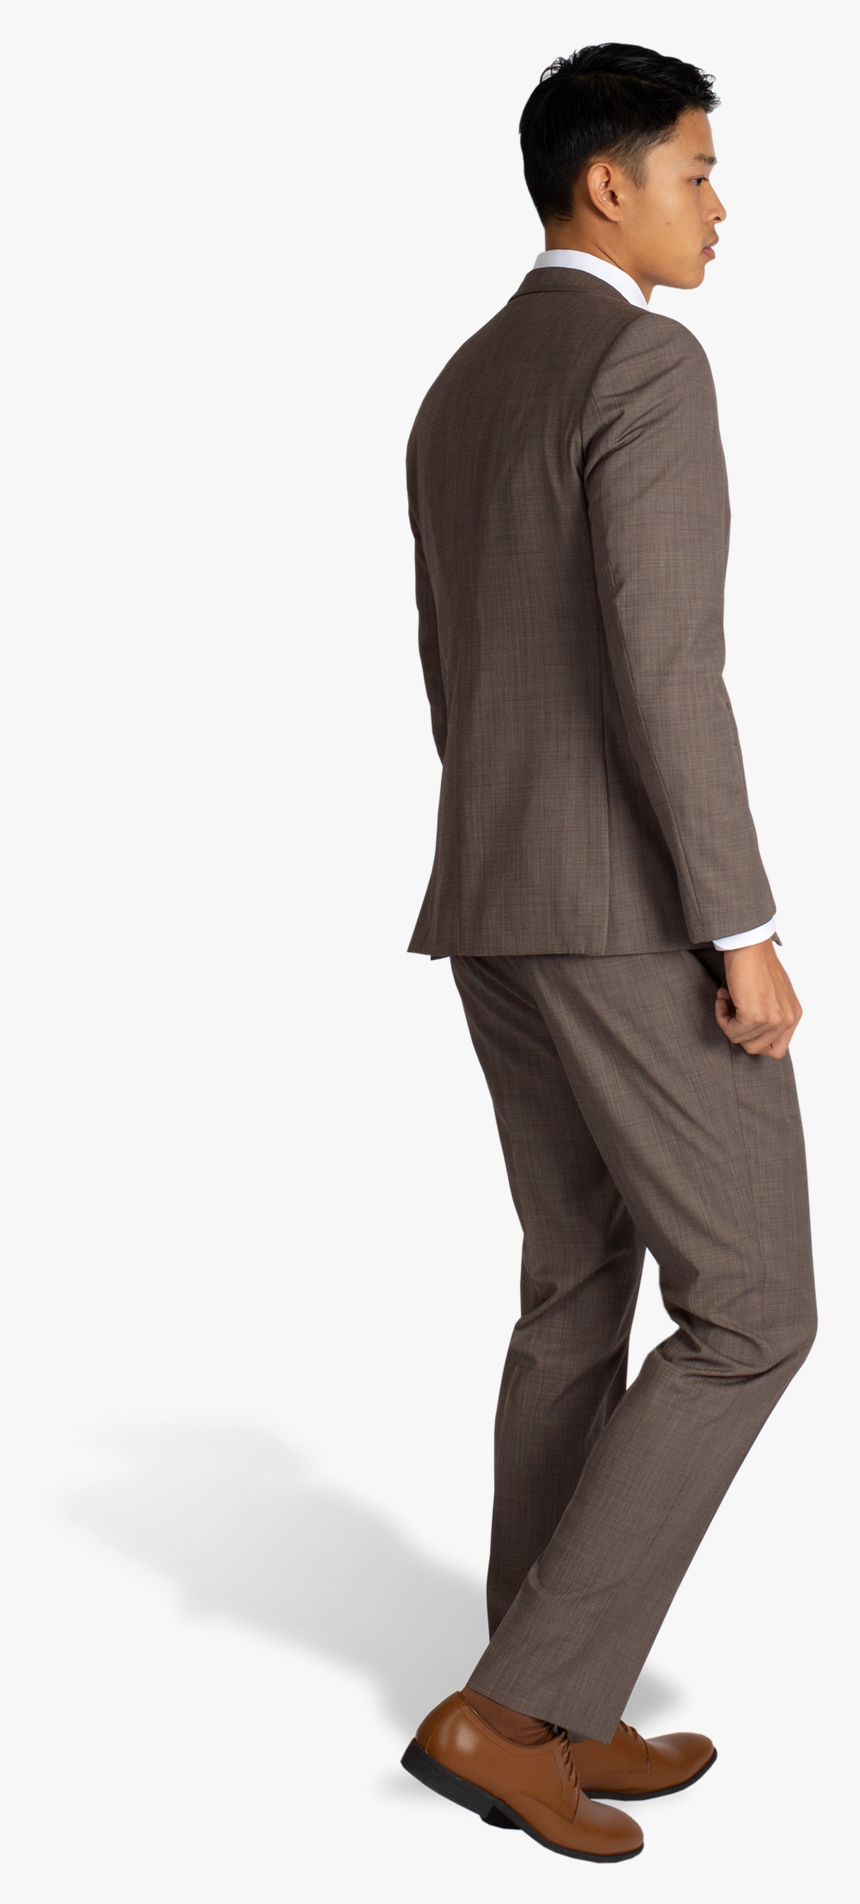 Cafe Brown Notch Lapel Suit By Allure - Formal Wear, HD Png Download, Free Download